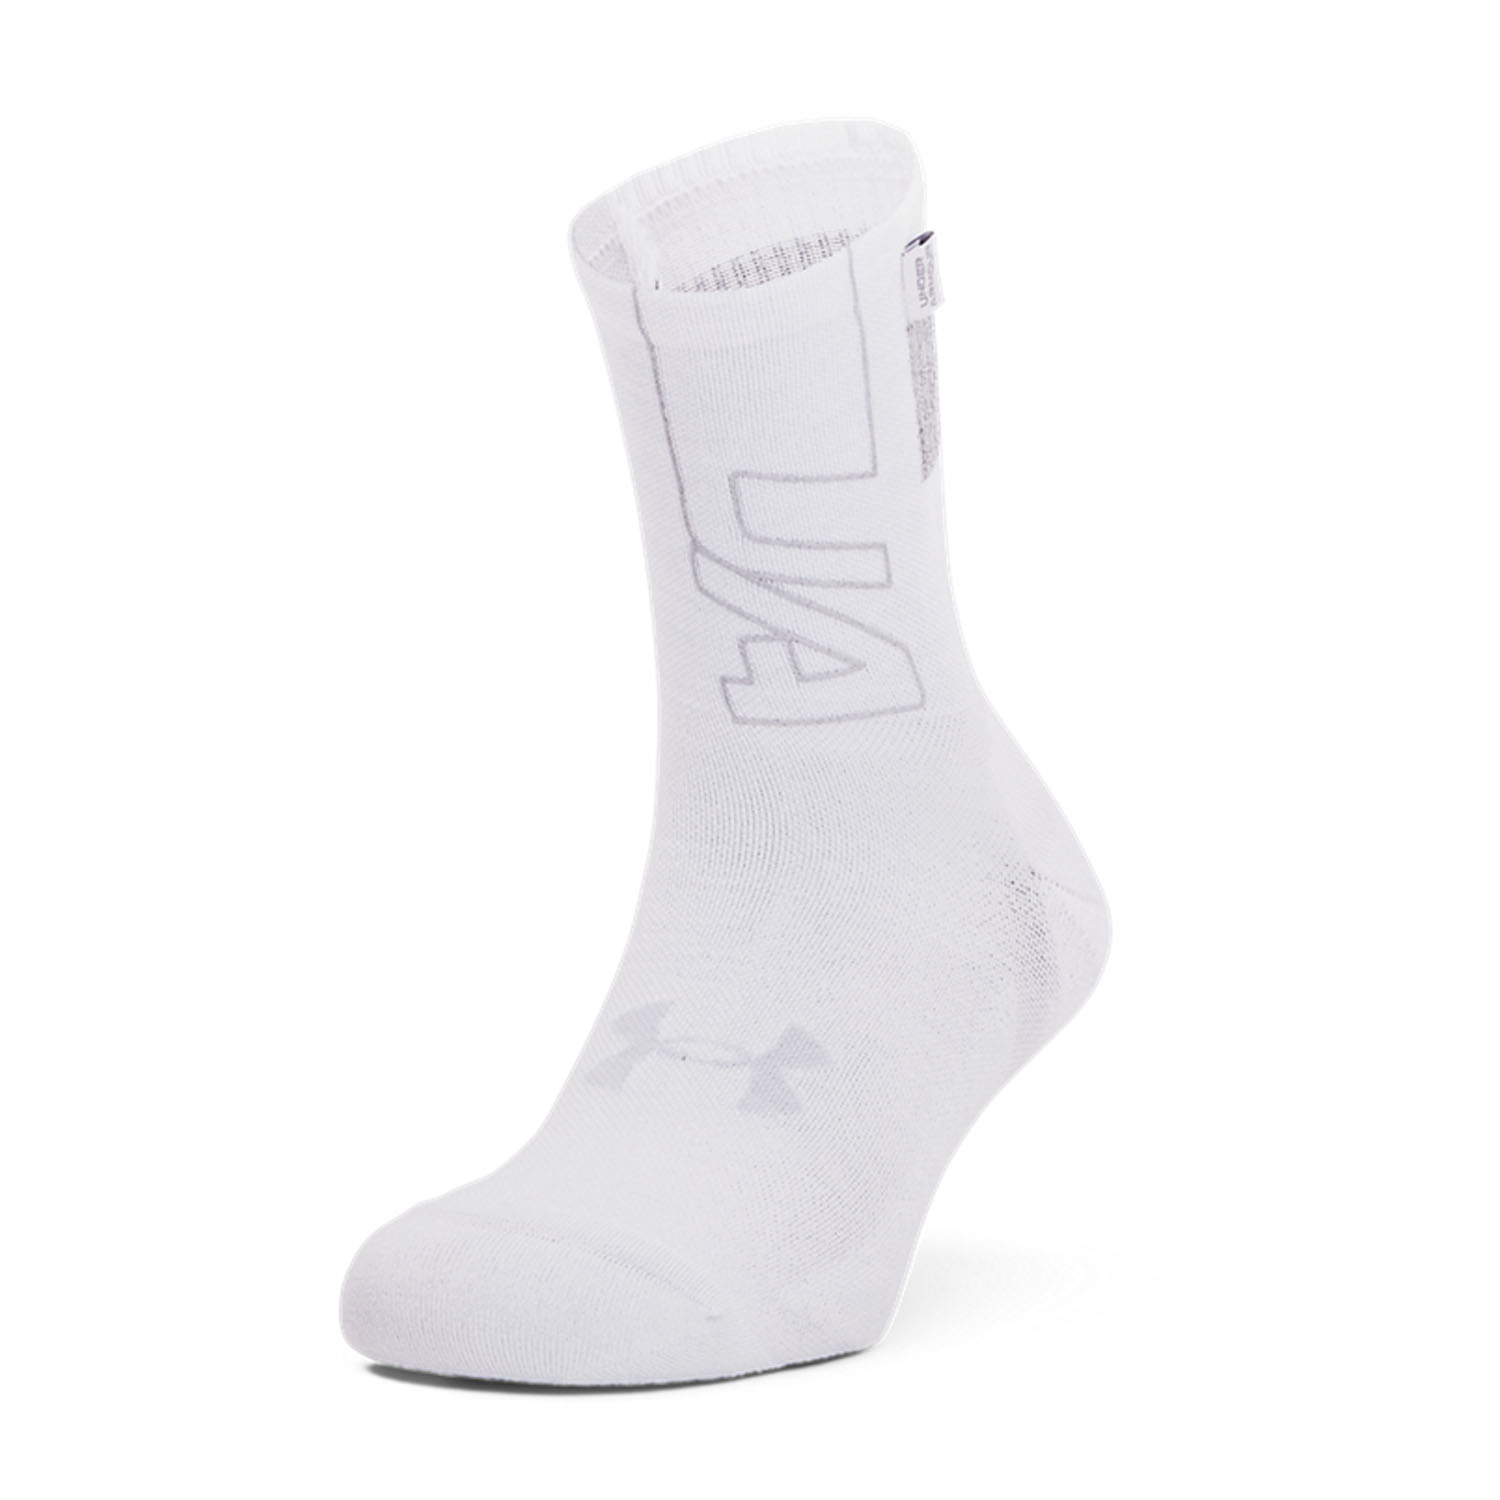 Under Armour Dry Crew Calcetines - White/Halo Gray/Mod Gray